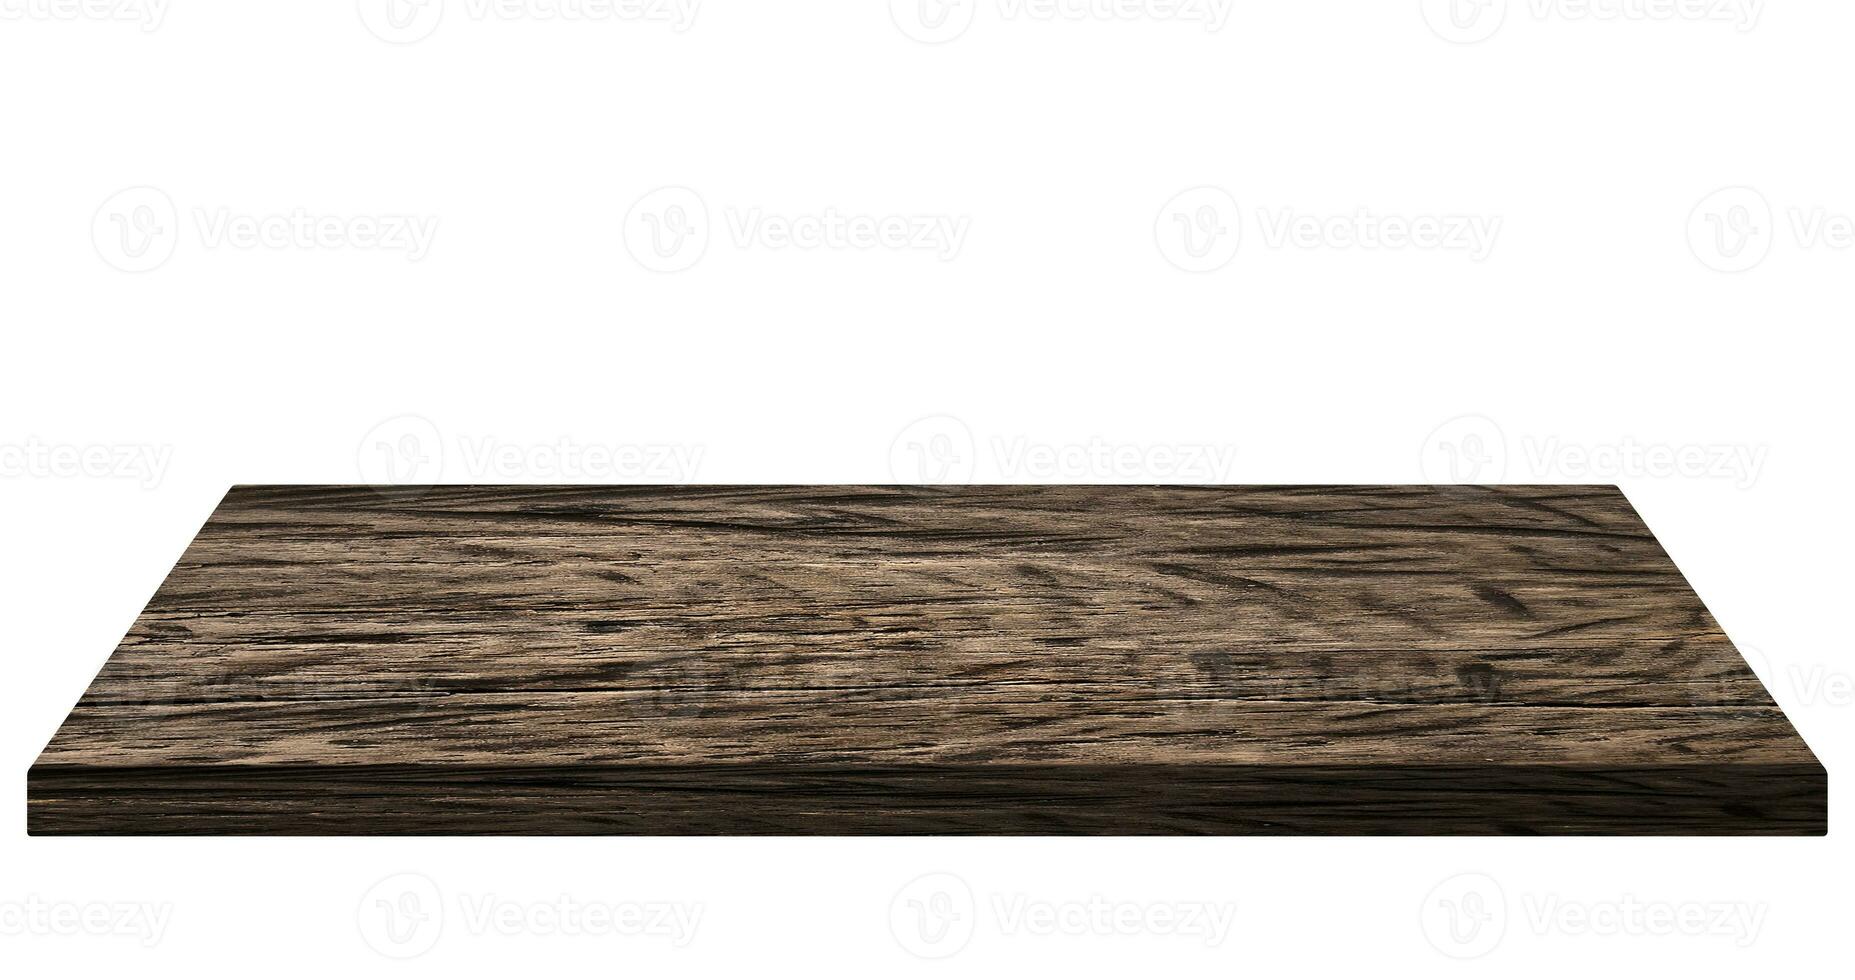 Wooden planks  wooden floors  wooden tables on a white background photo